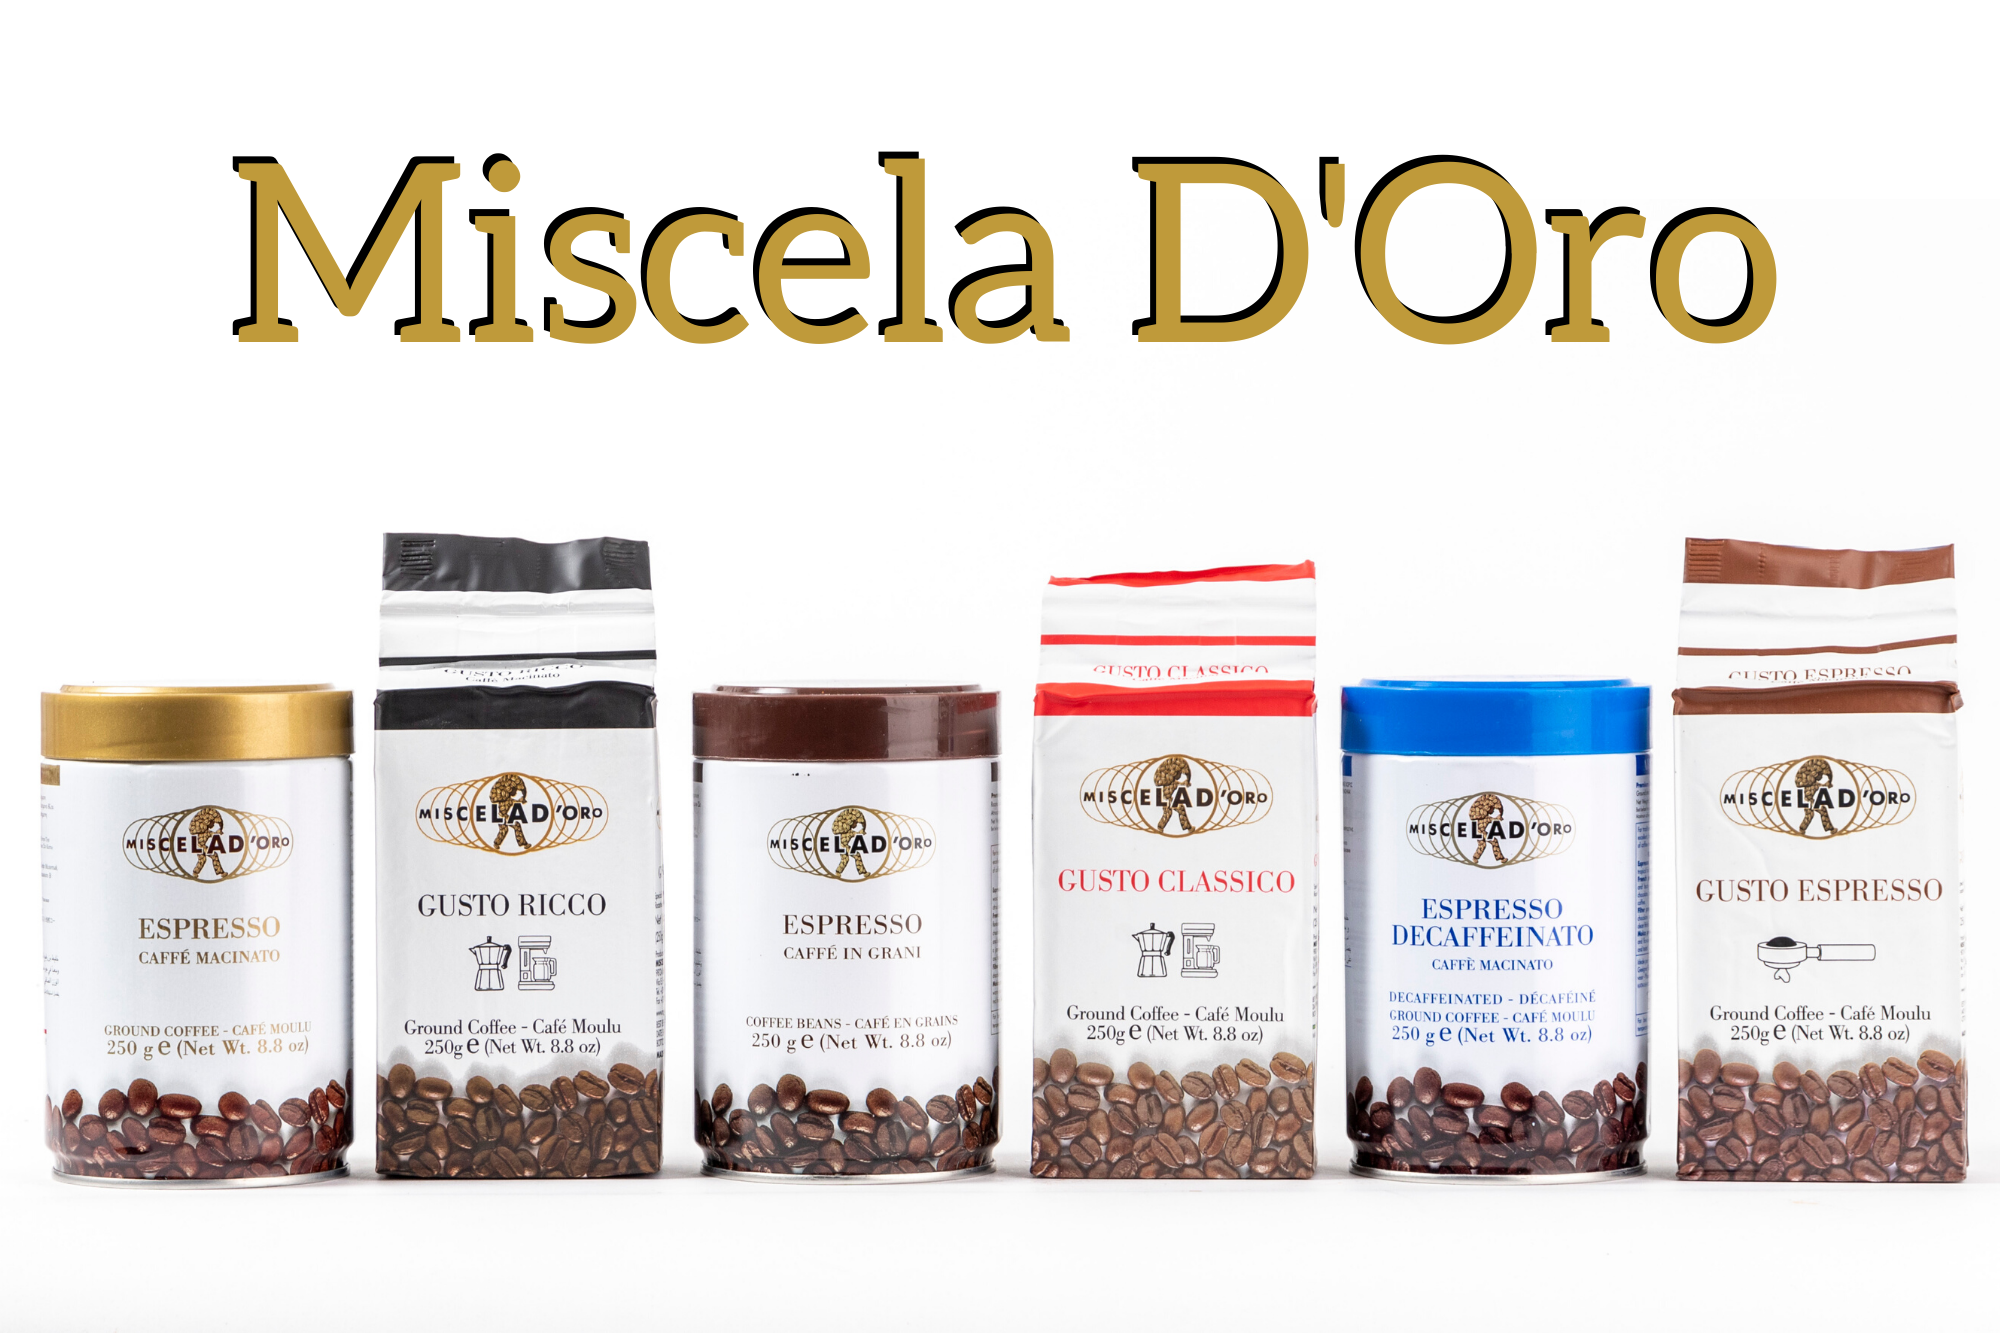 Miscela d'Oro, the story of traditional Italian coffee – Magnifico Food